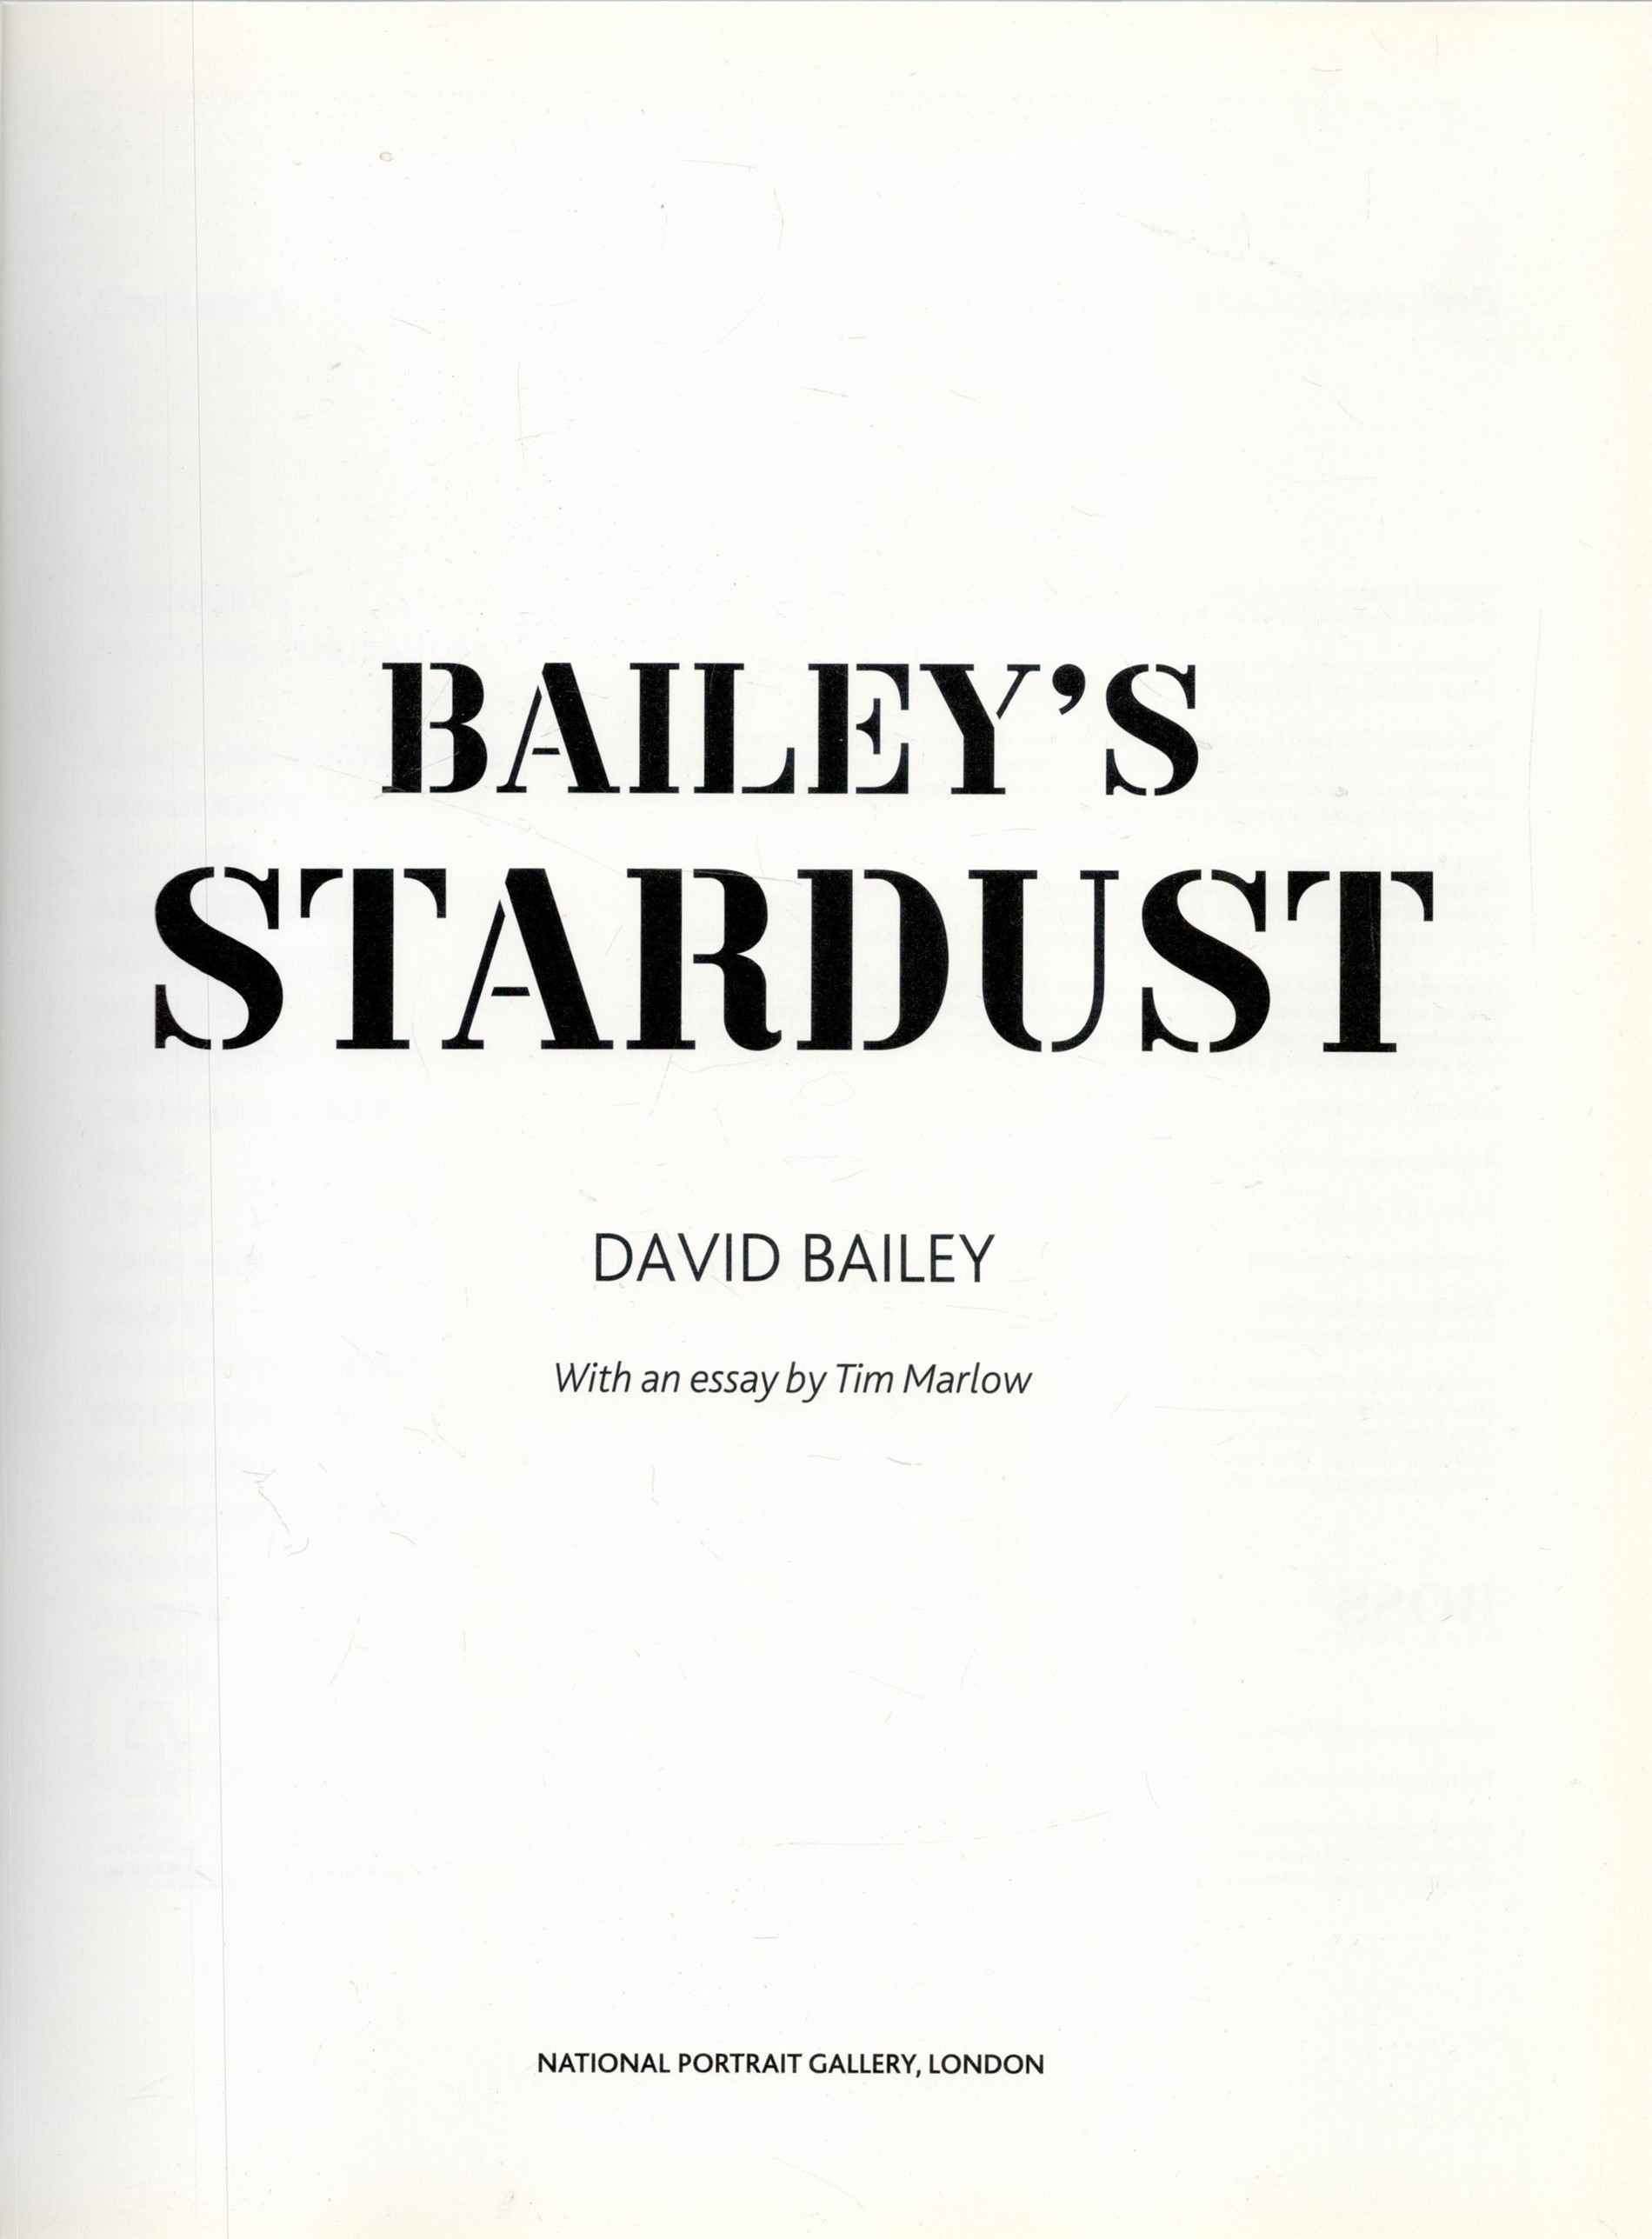 Bailey's Stardust by David Bailey 2010 First Edition Hardback Book with 272 pages published by - Image 2 of 3